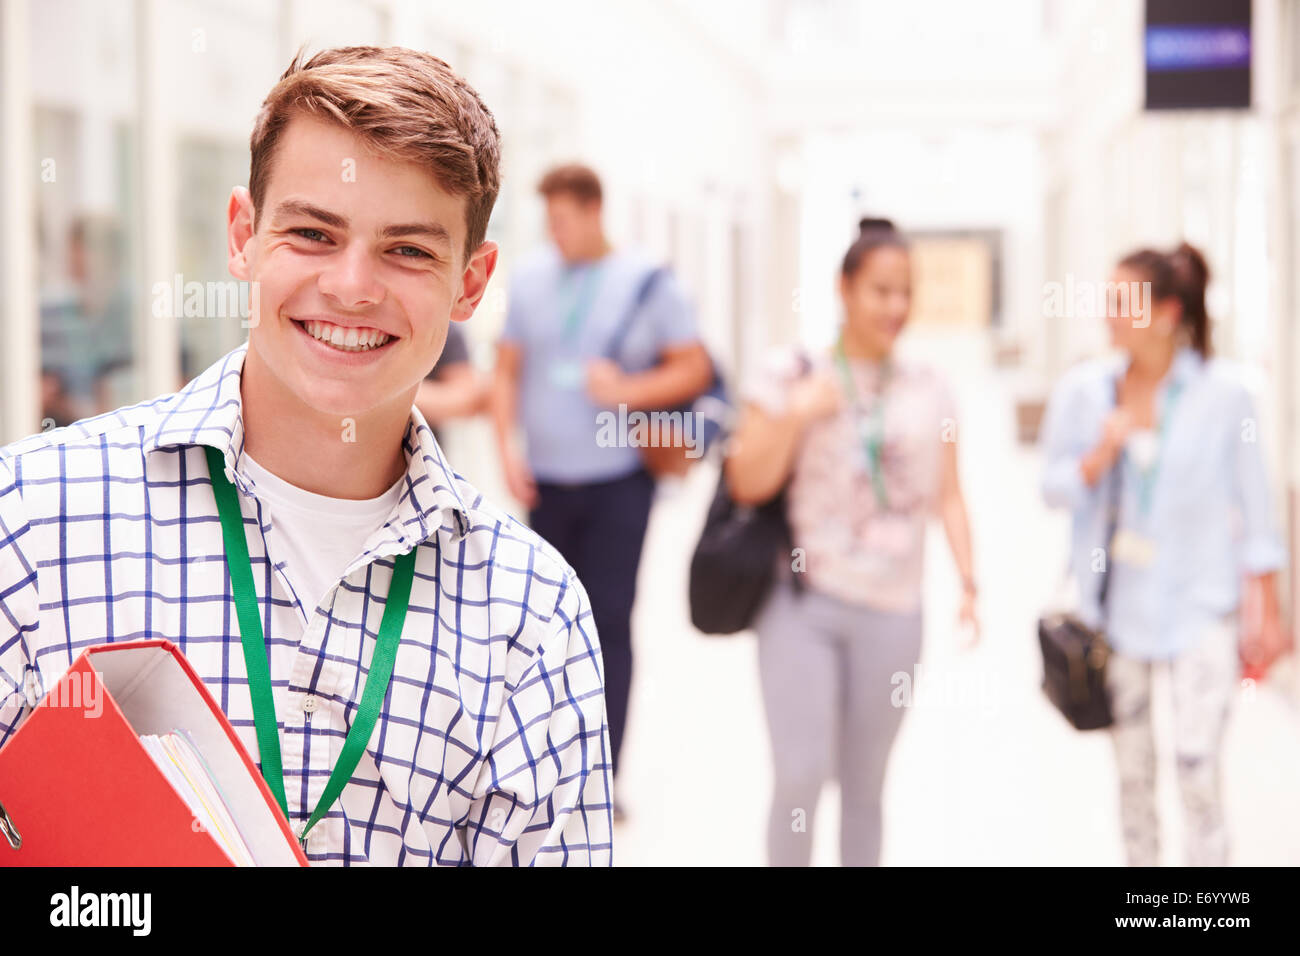 Portrait Of Male College Student In Hallway Stock Photo